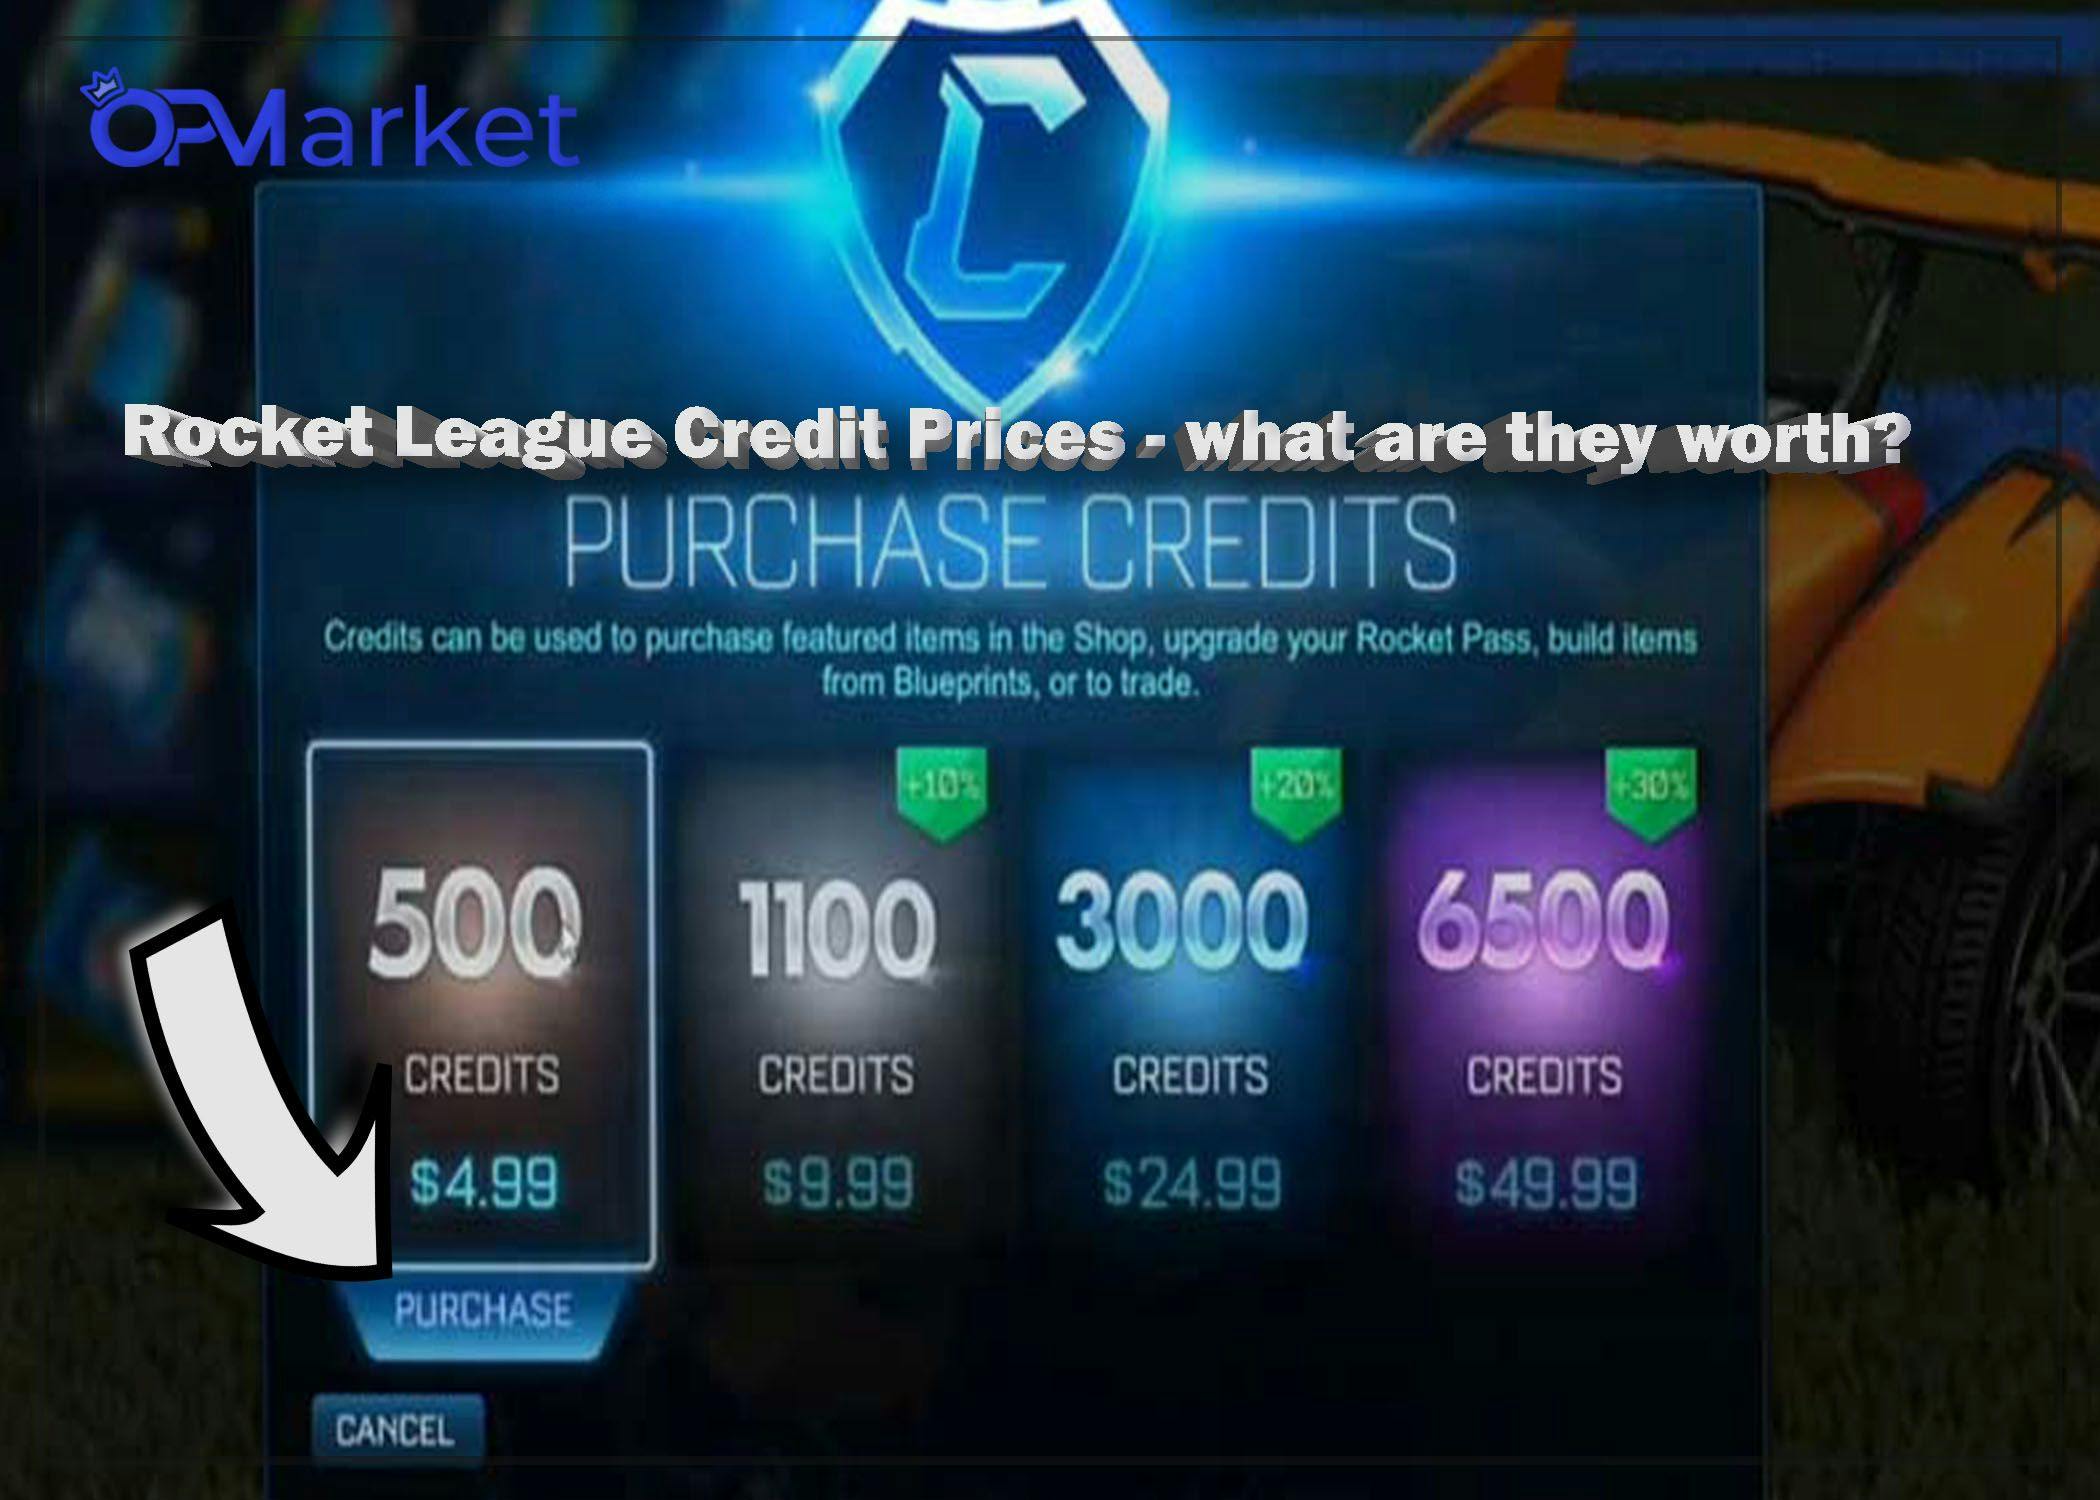 Rocket League Credit Prices - What do they worth?